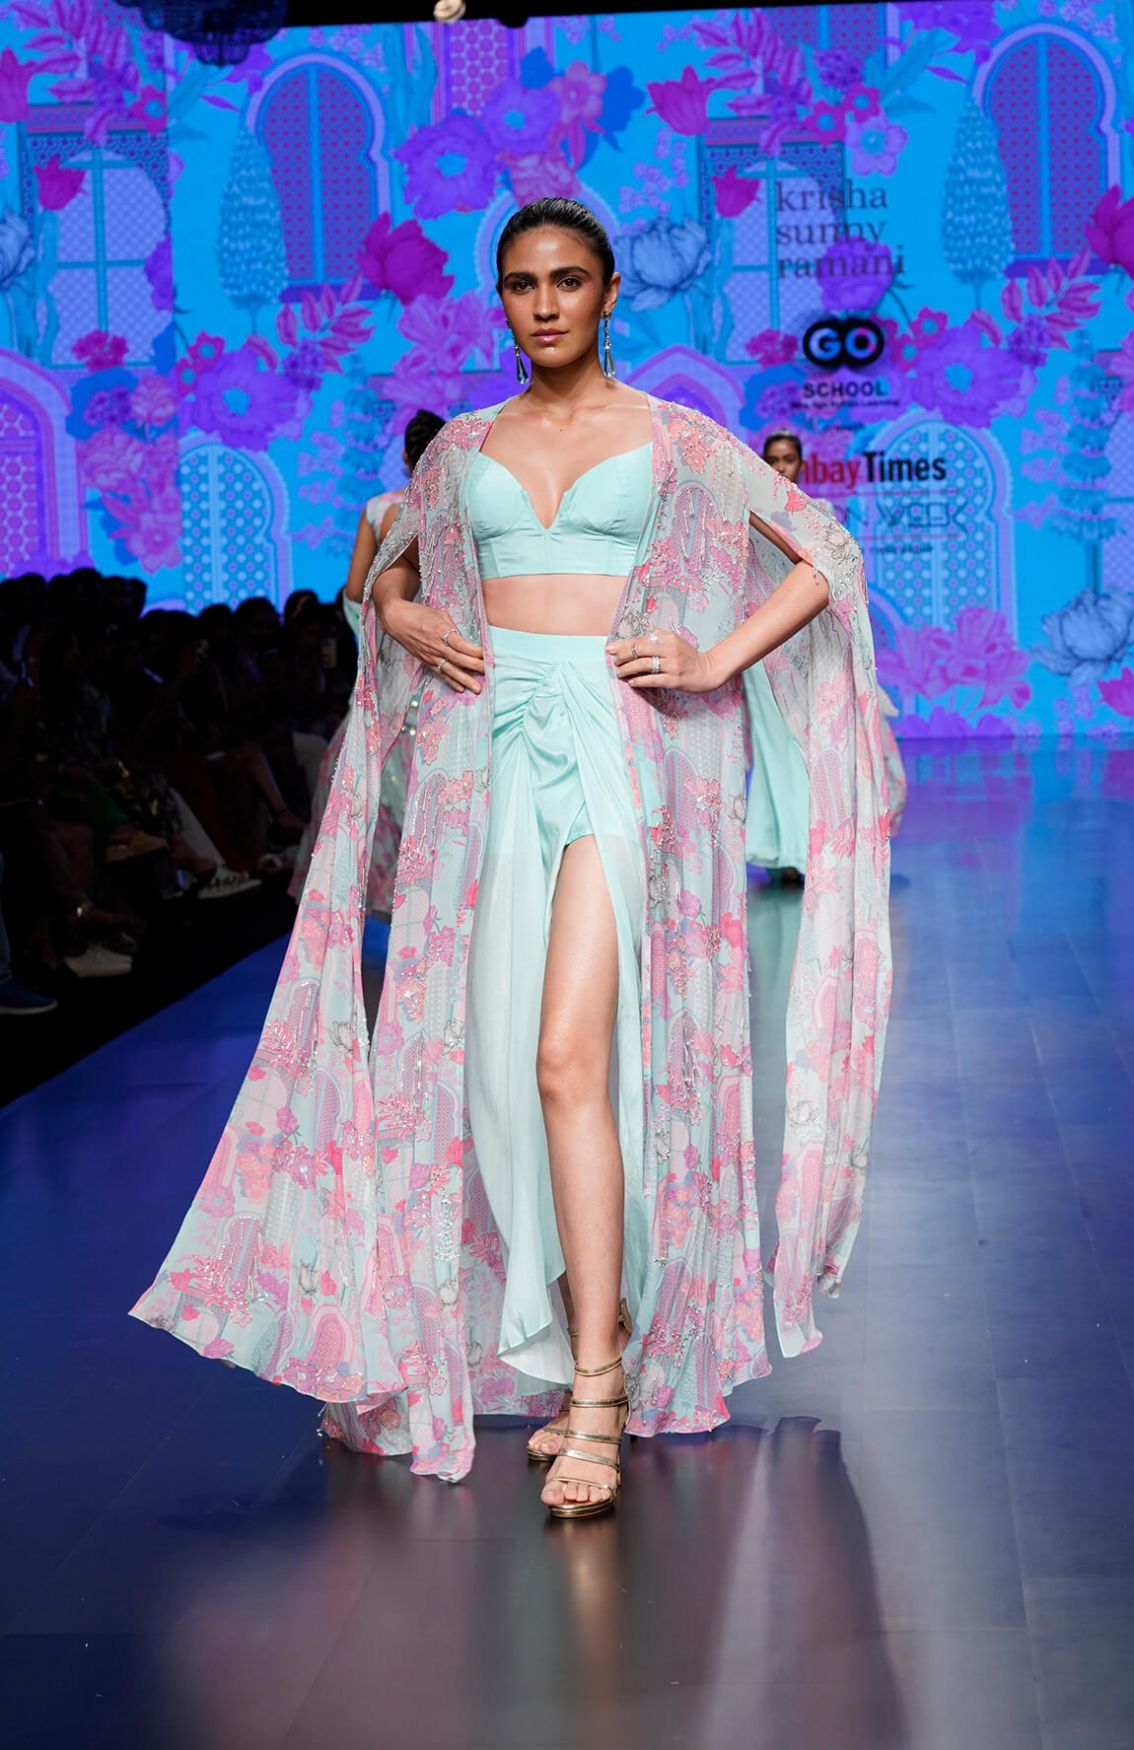 Powder Blue Blouse With Dhoti Skirt & Printed Embroidered Cape 